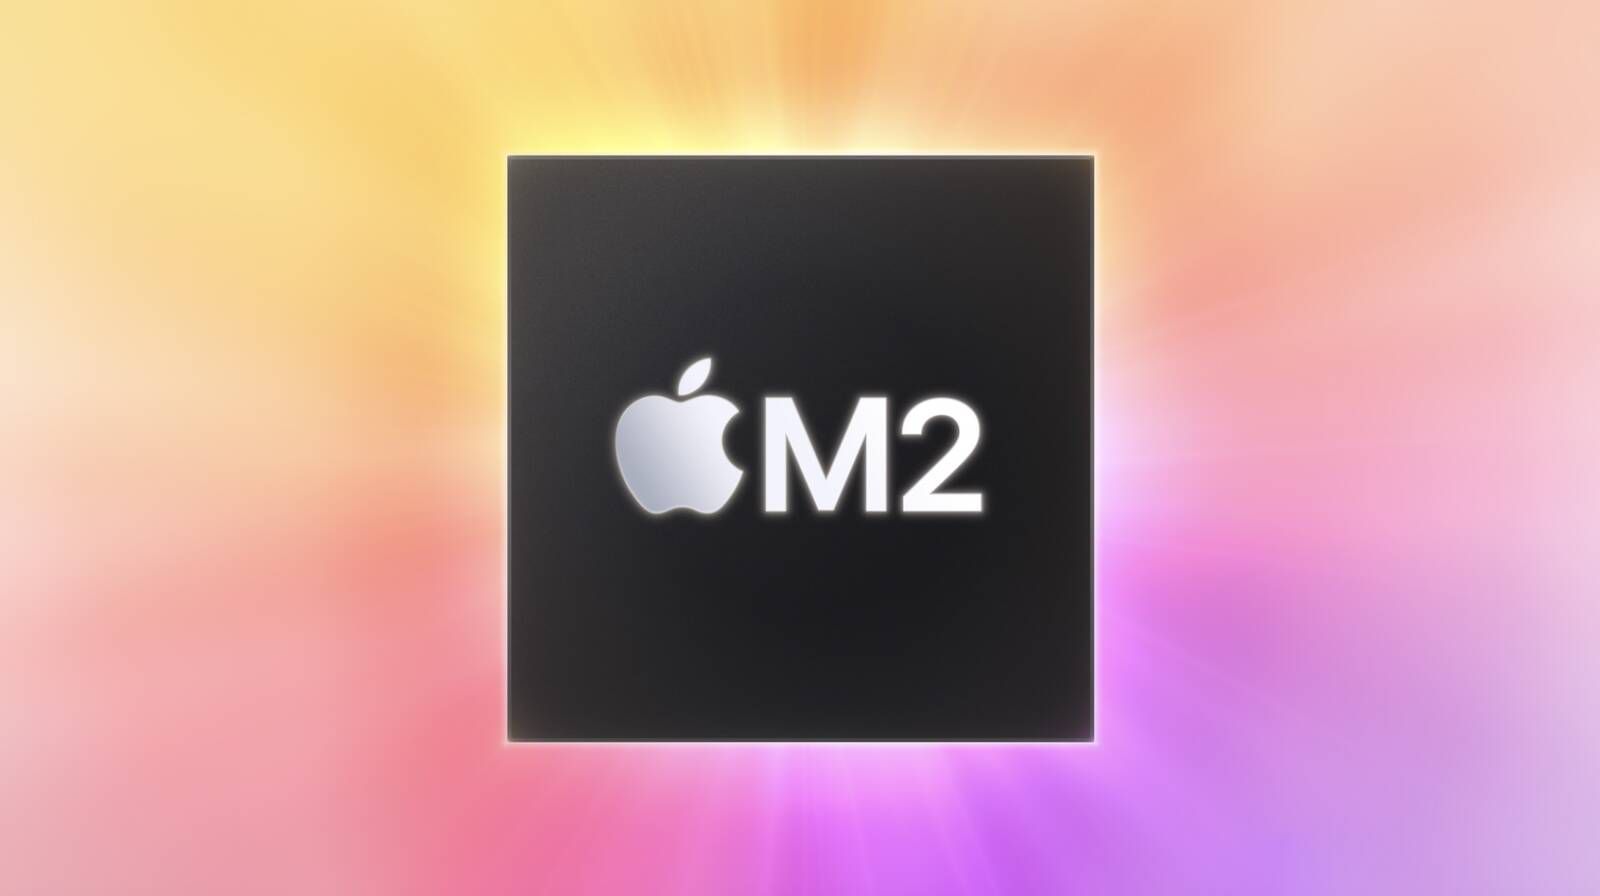 Kuo: New 15-Inch MacBook With M2 and M2 Pro Chip Options Planned for 2023 - macrumors.com